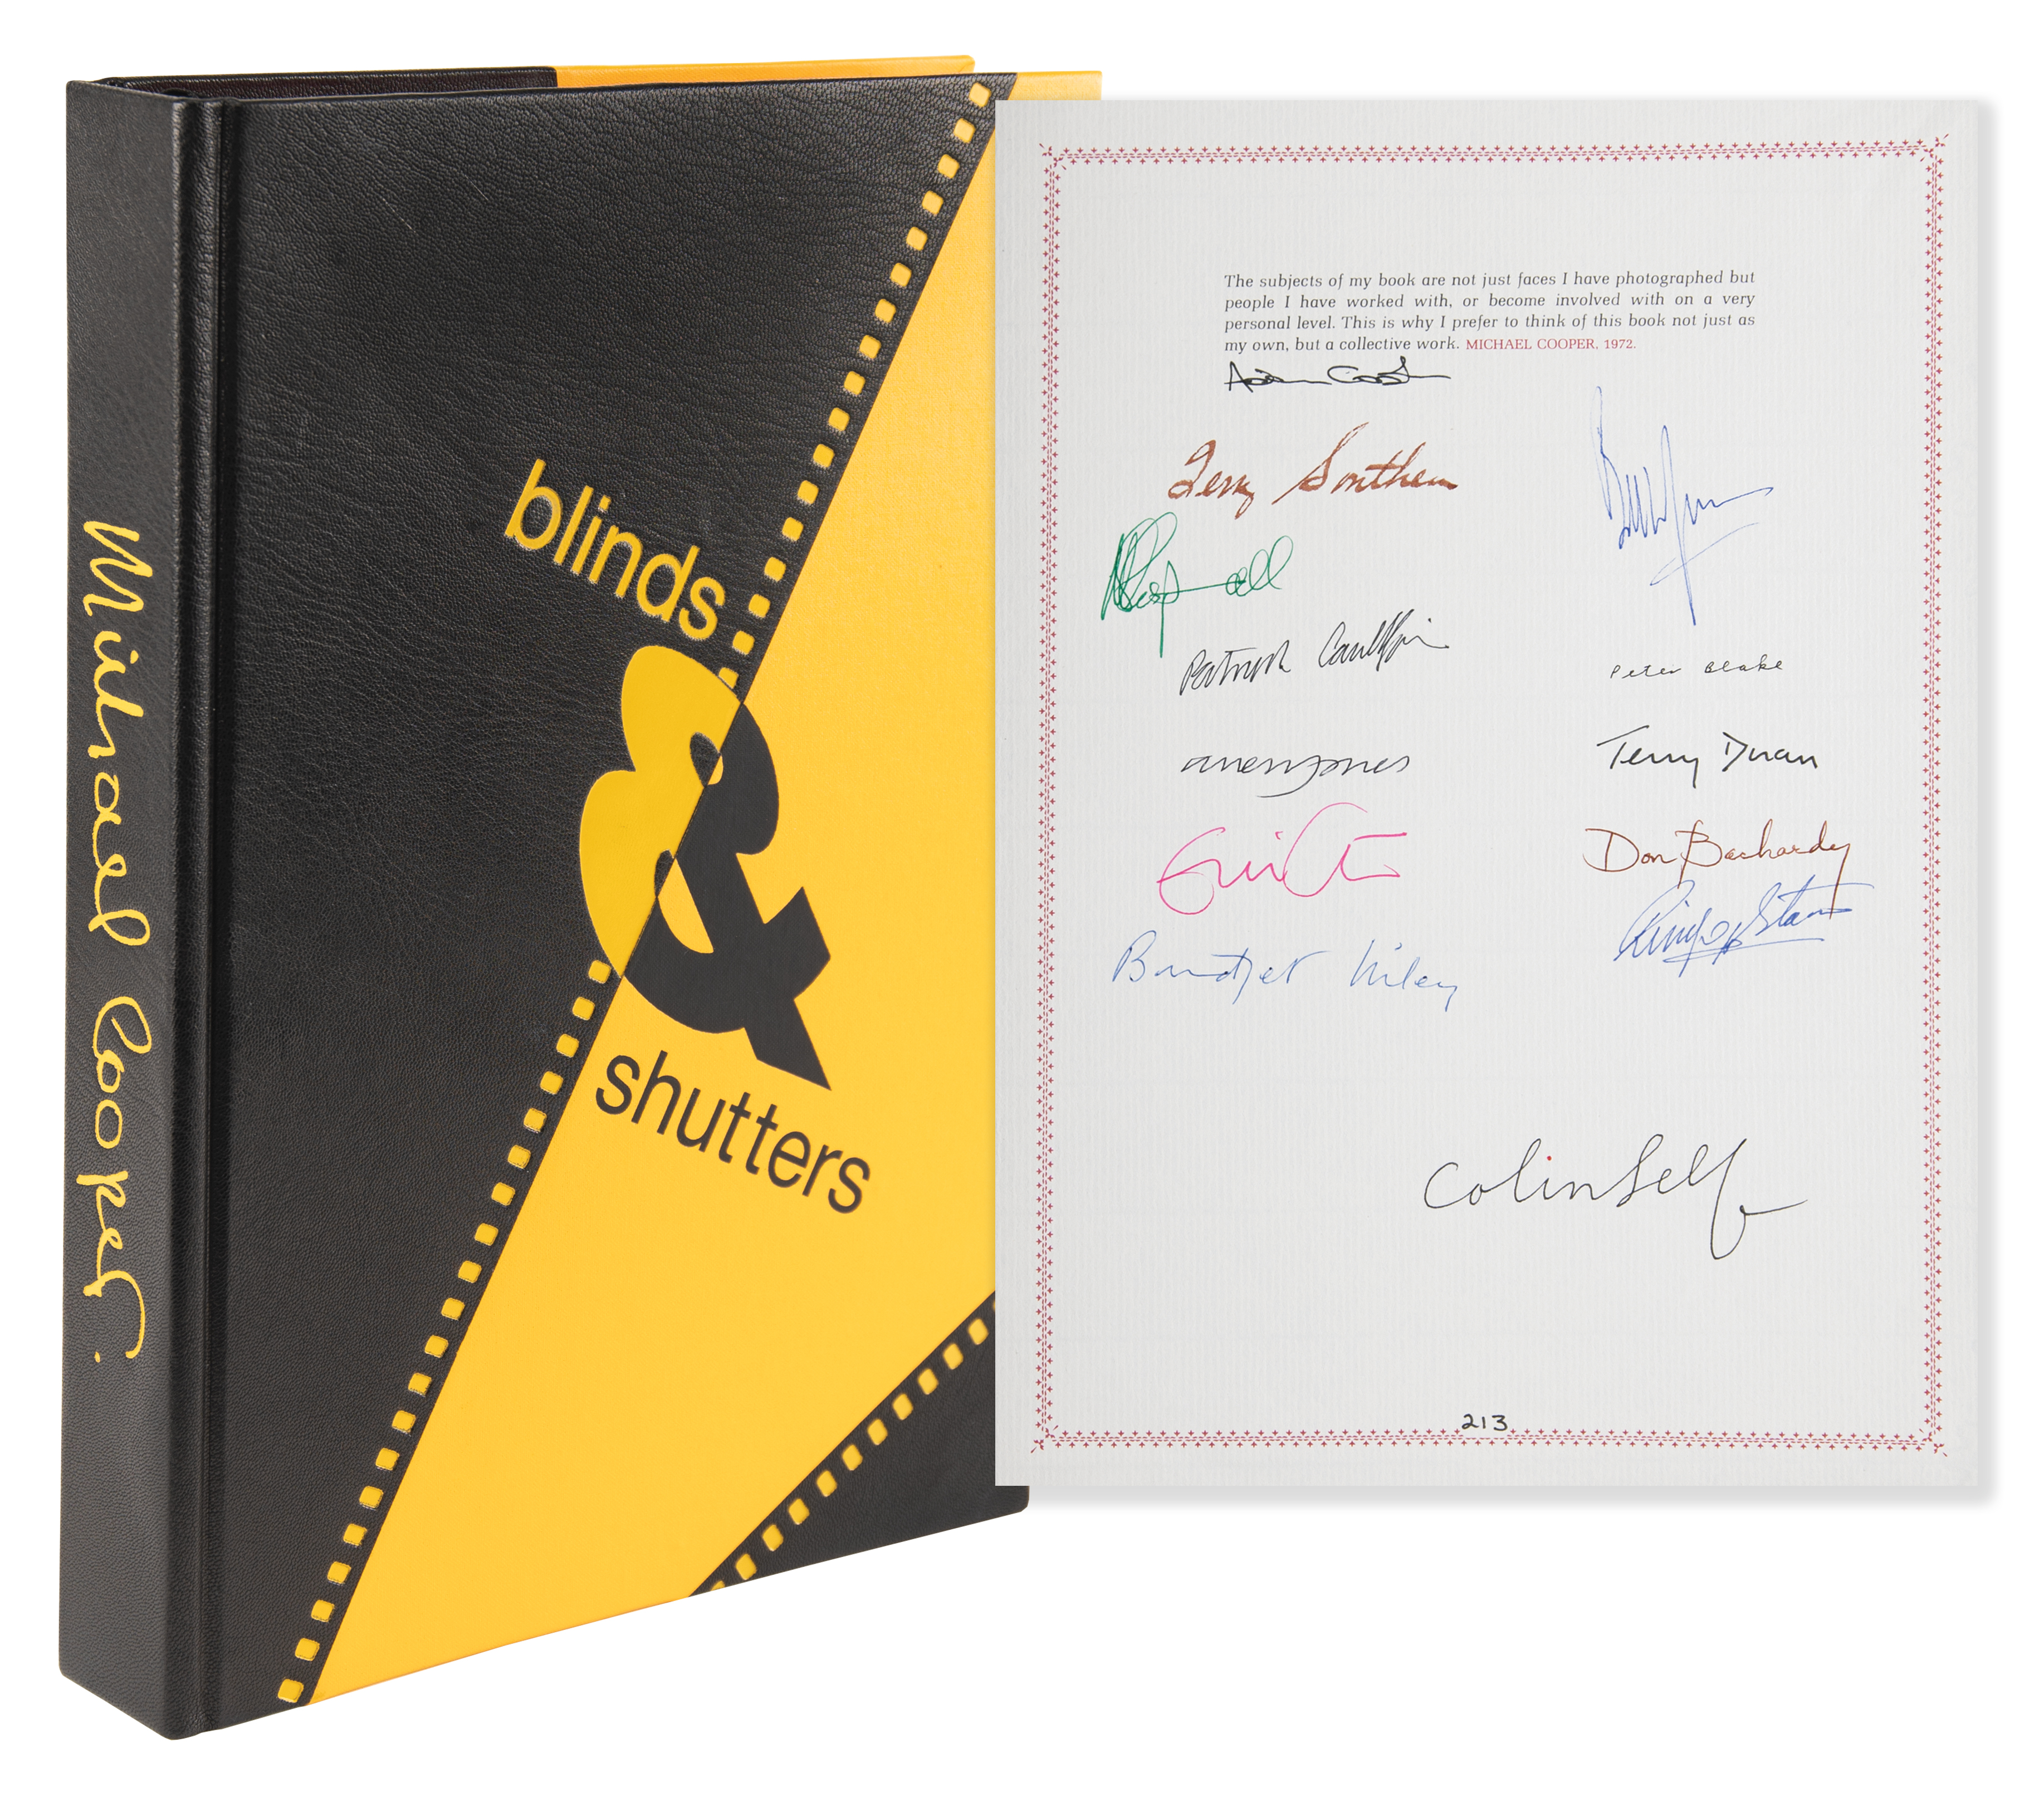 Lot #5149 Eric Clapton, Ringo Starr, Bill Wyman, and Others Signed Ltd. Ed. Book - Blinds & Shutters - Image 1